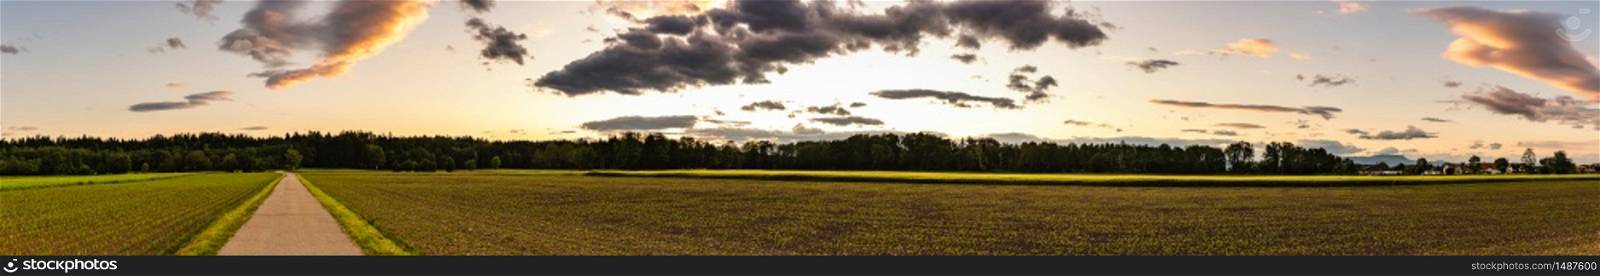 Panorama, sunset over fields in Austria with dramatic sunset sky and road leading to woods. Agriculture landscape.. Panorama, sunset over fields in Austria with dramatic sunset sky and road leading to woods.